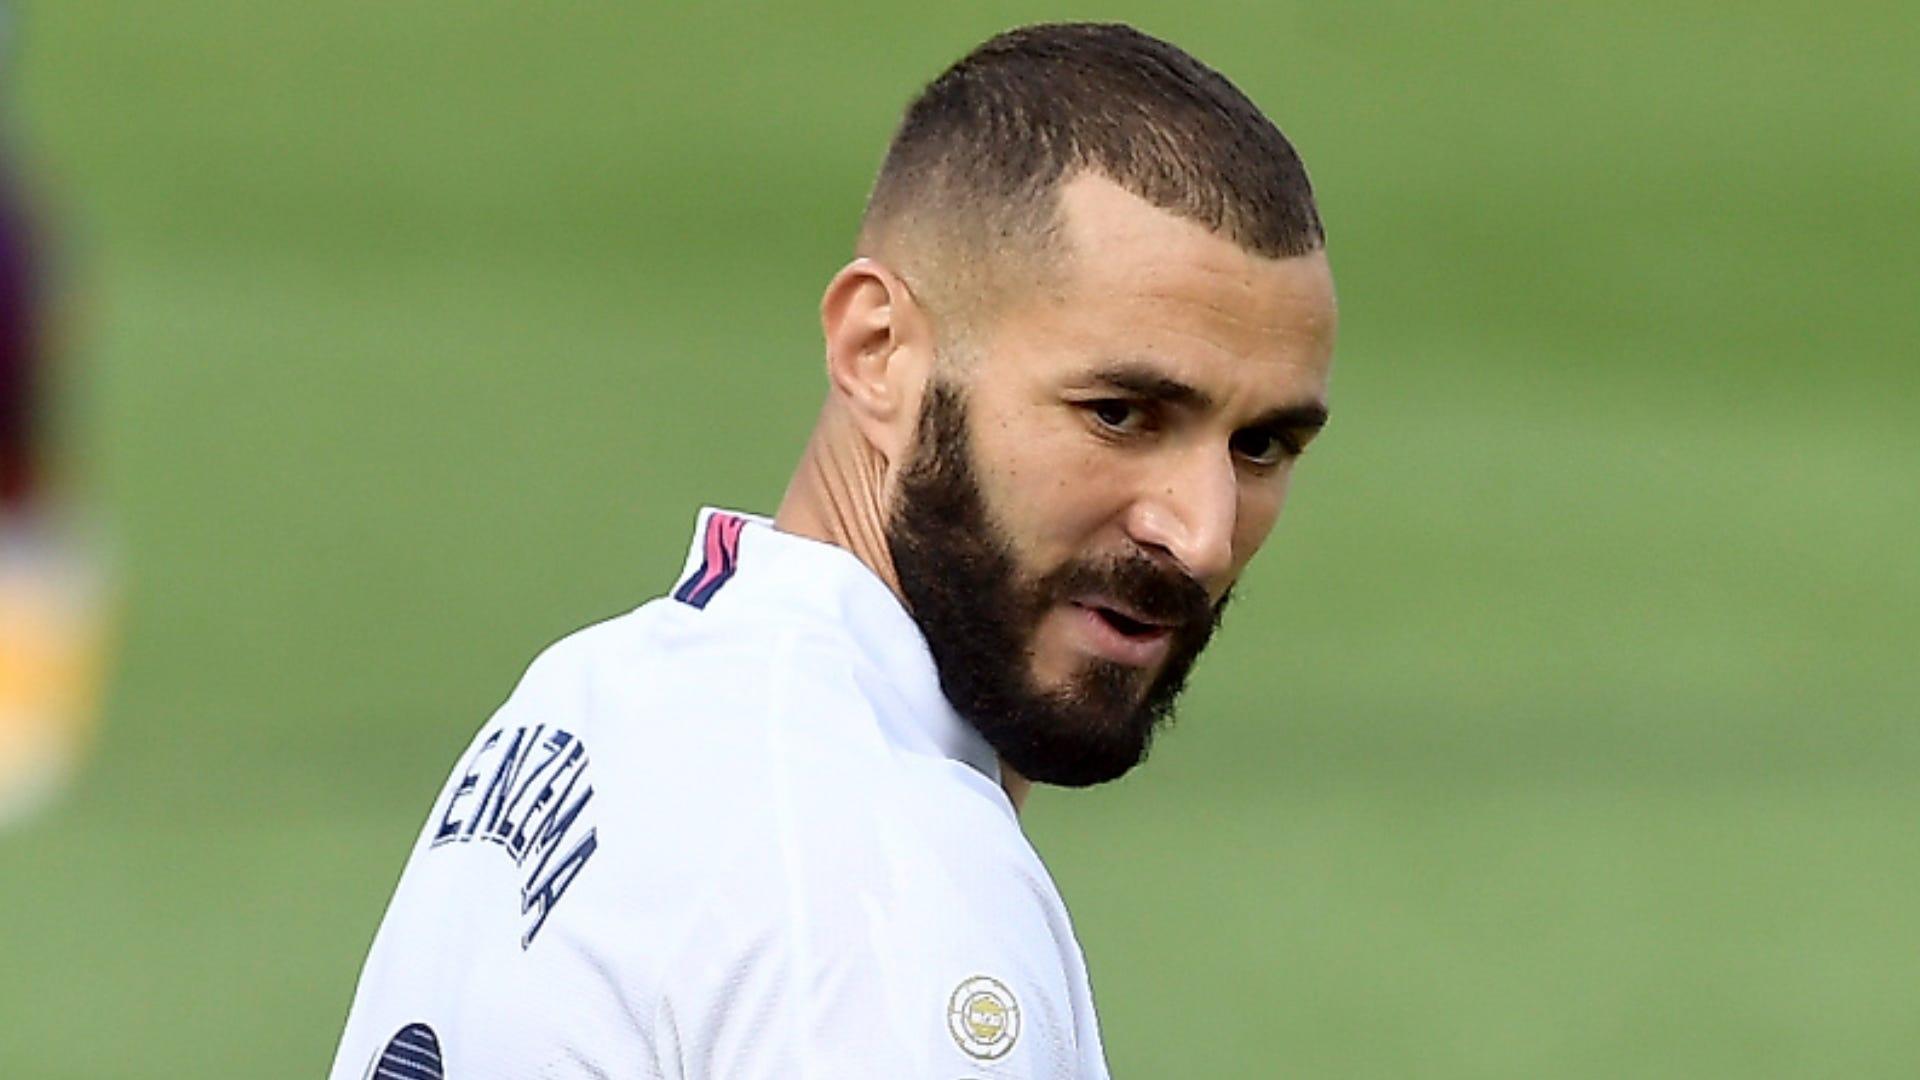 ‘Don’t Pass to Him’: Benzema’s Frustration Erupts at Real Madrid Teammate